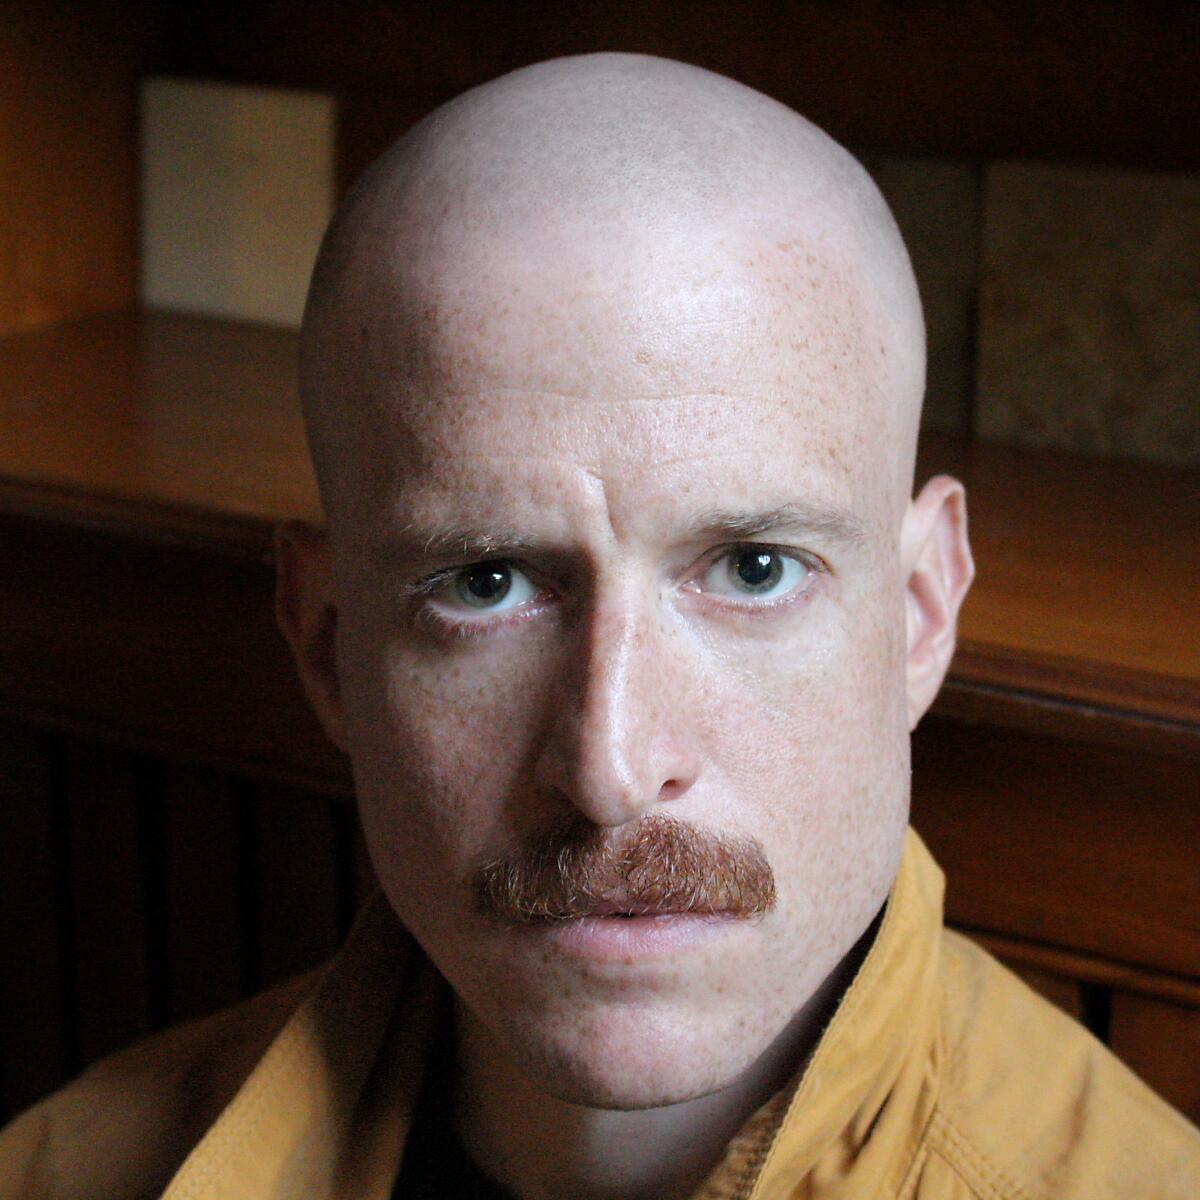 A man with a shaved head and red mustache in a yellow shirt, staring intensely.